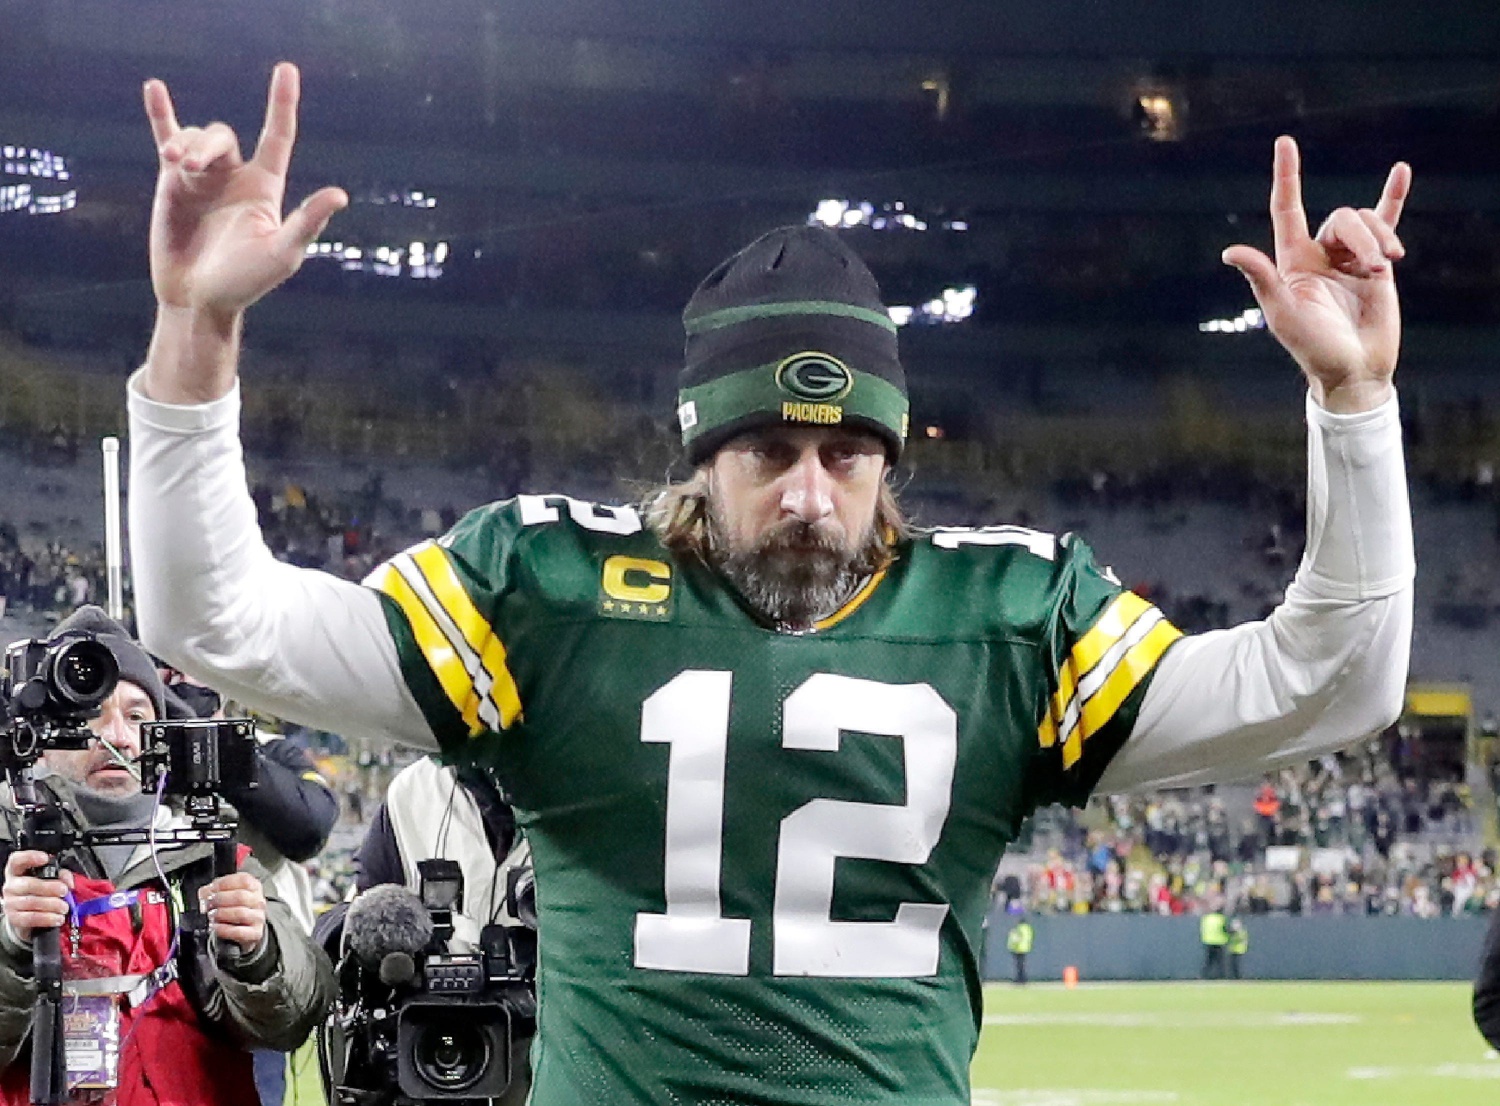 Packers continue their playoff push as they host the rival Vikings - Die  Hard Packer Fan